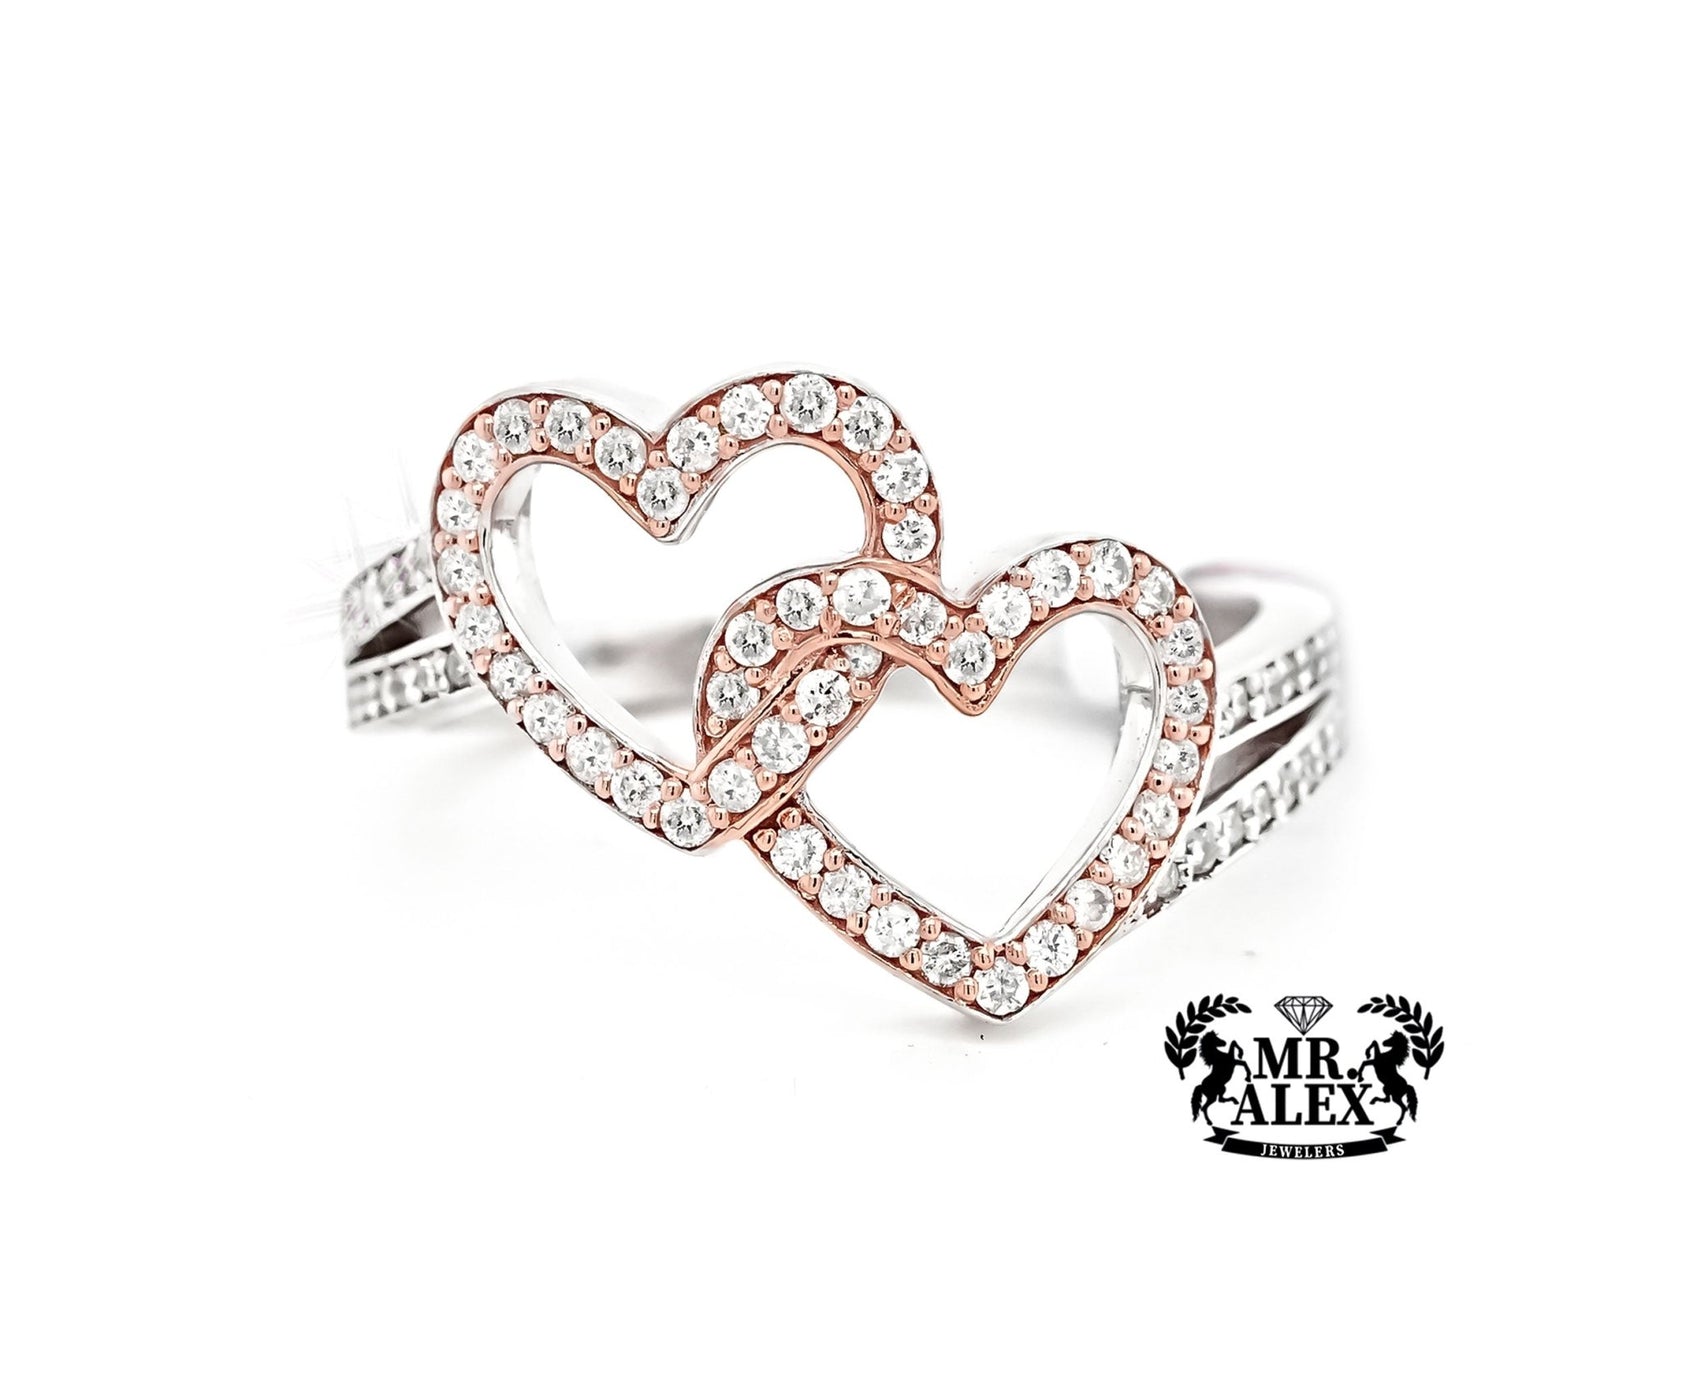 10k White and Rose Gold Entwined Hearts Diamond Ring 0.45ct - Mr. Alex Jewelry